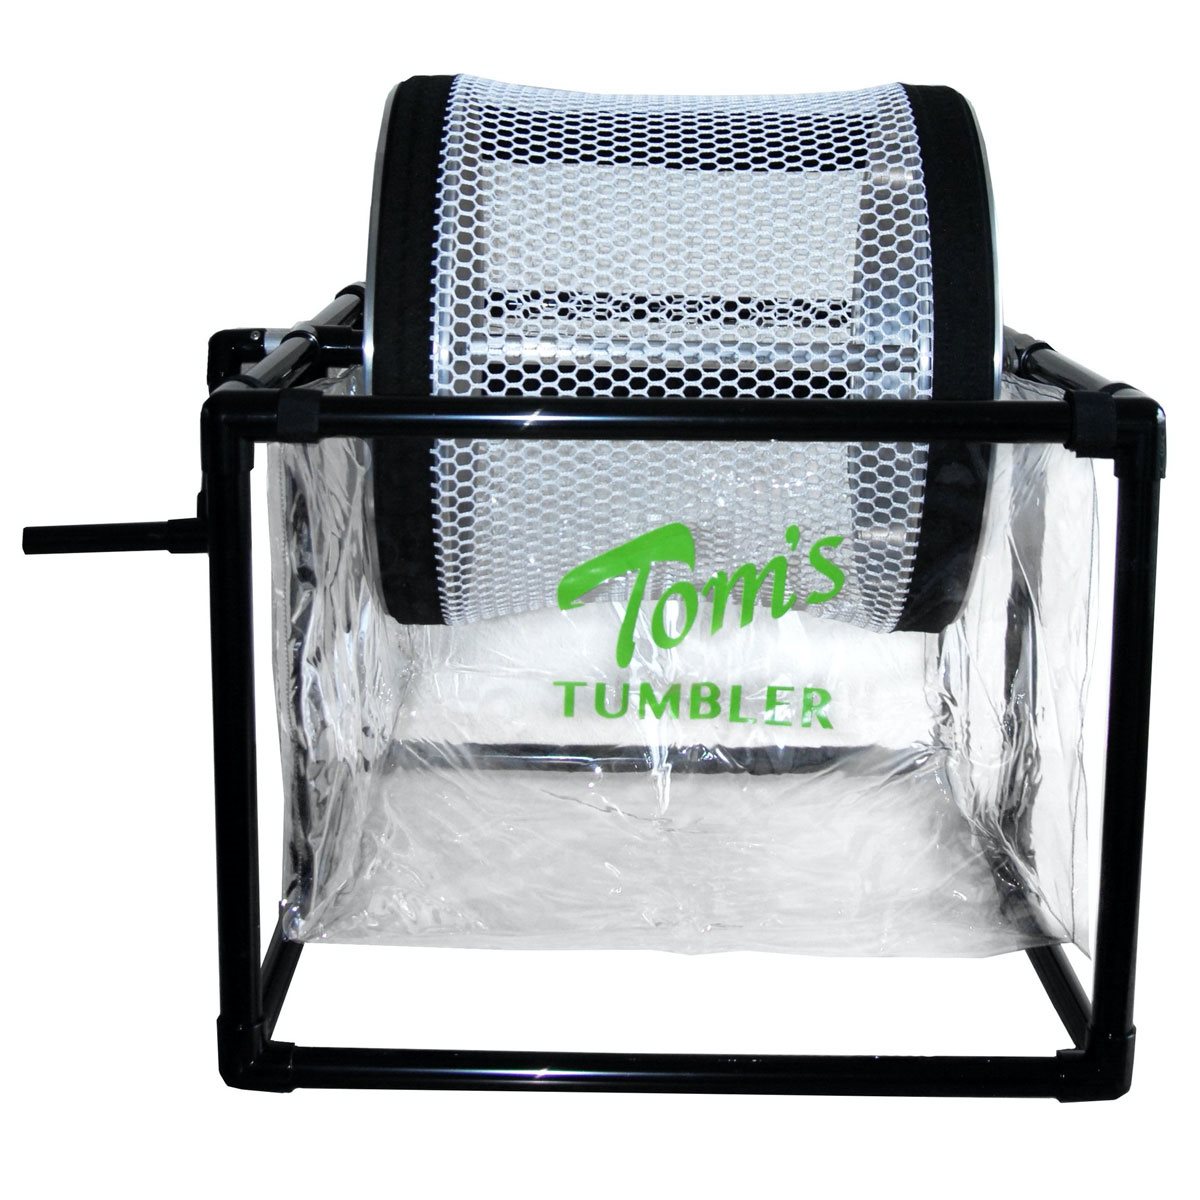 Tom's Tumbler 1600 Hand Crank Table Top Dry Trimmer